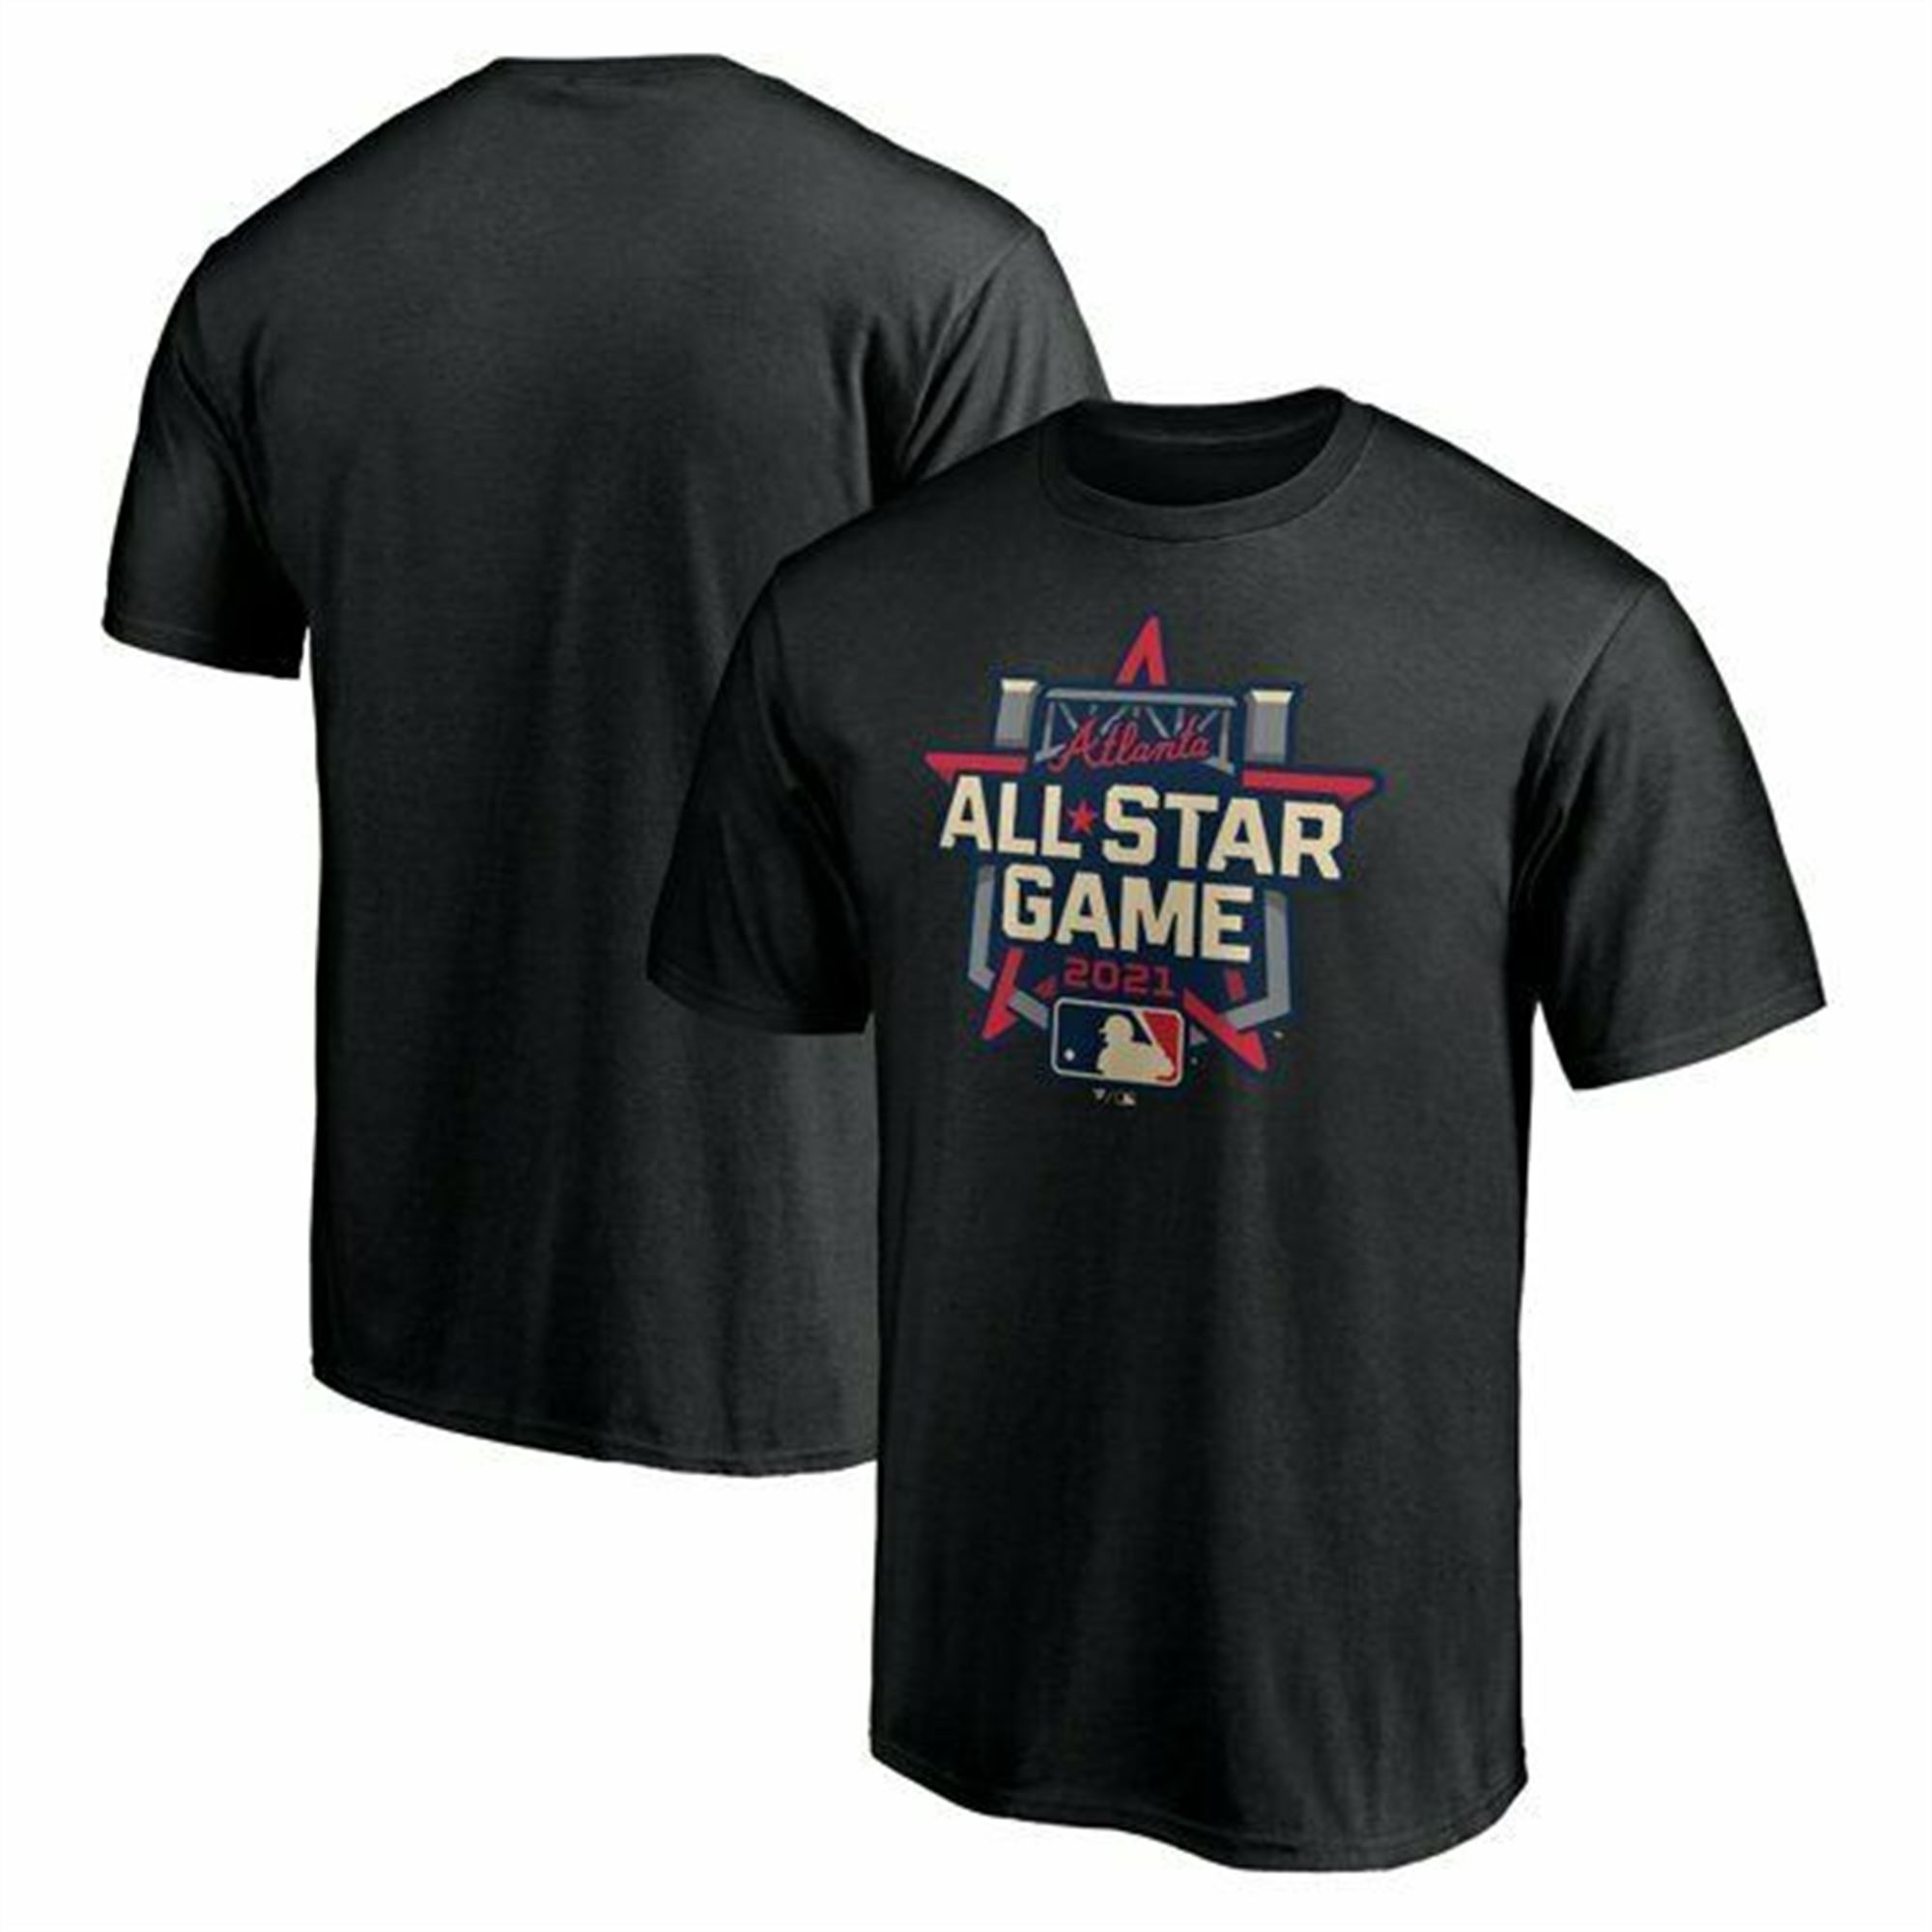 Atlanta Braves 2021 World Series Champions T-shirt - All Star Game Plus Size Up To 5xl